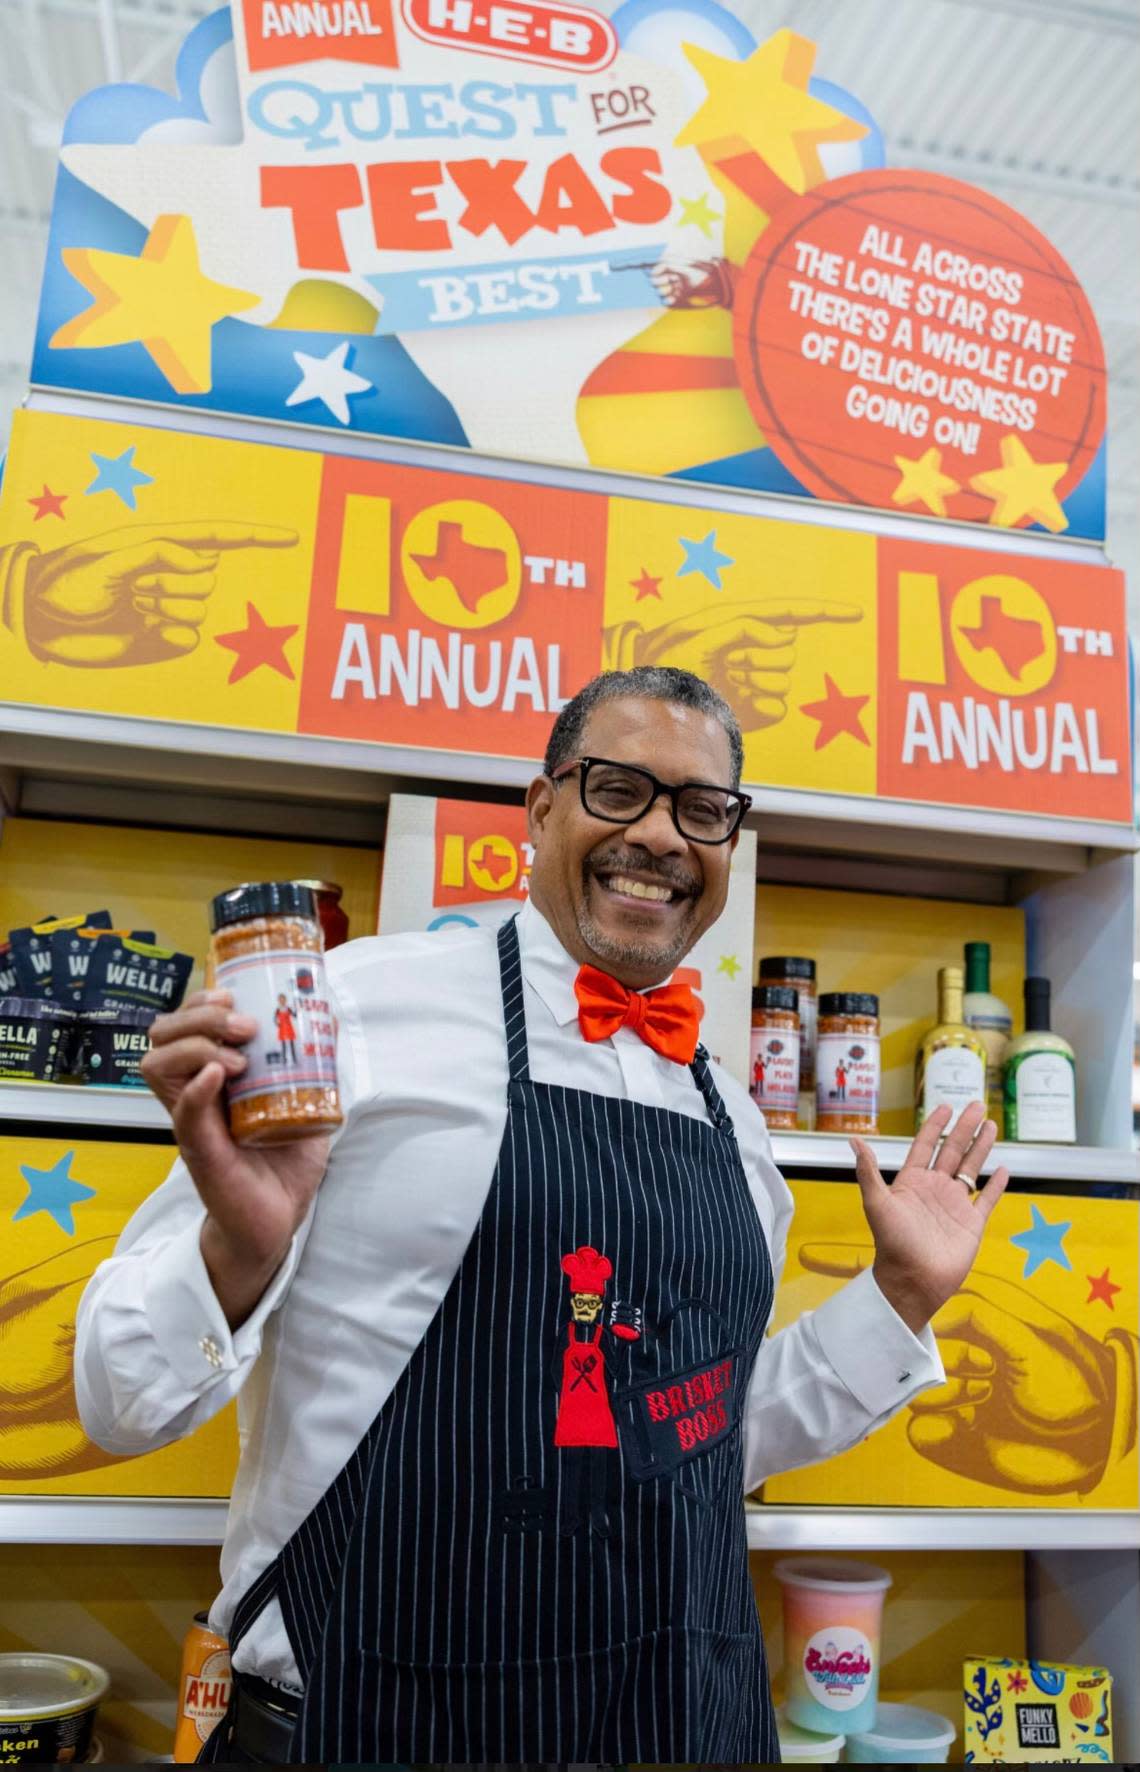 Royce Simmons was the only finalist for H-E-B’s annual Quest for Texas Best from the Dallas-Fort Worth Metroplex.